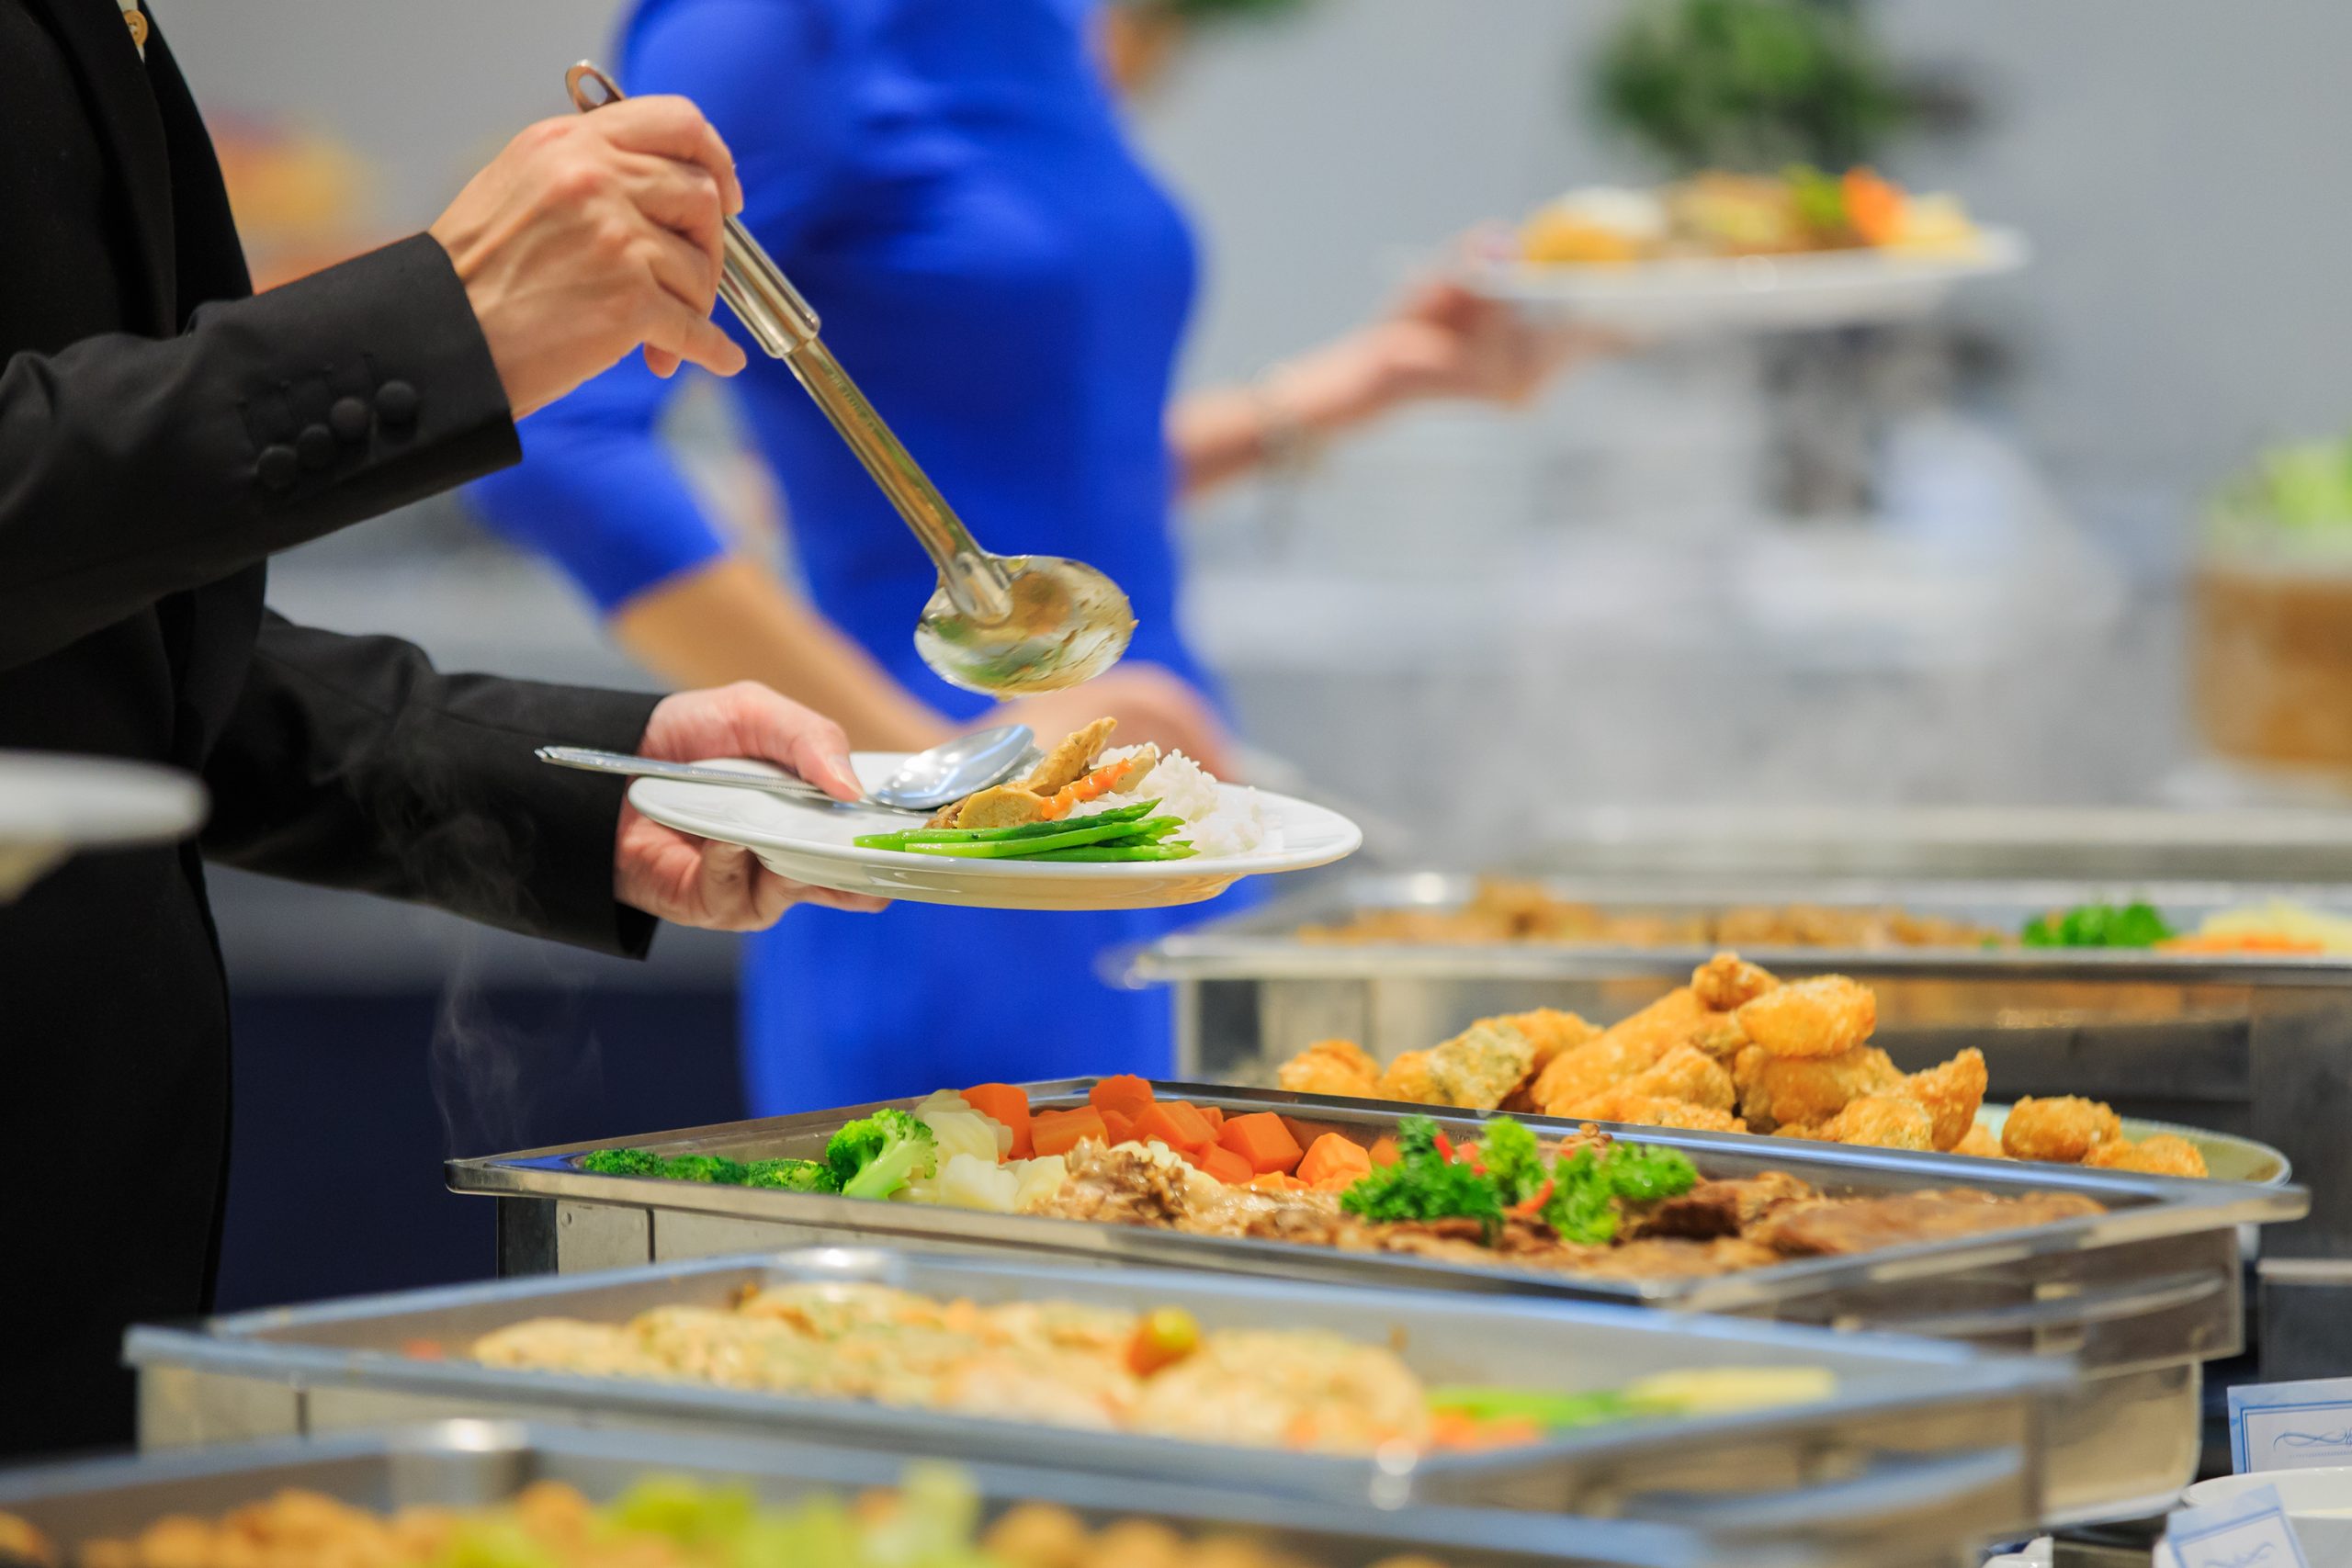 Booking A Wedding Caterer In Noida? Make Sure To Ask These Questions First!